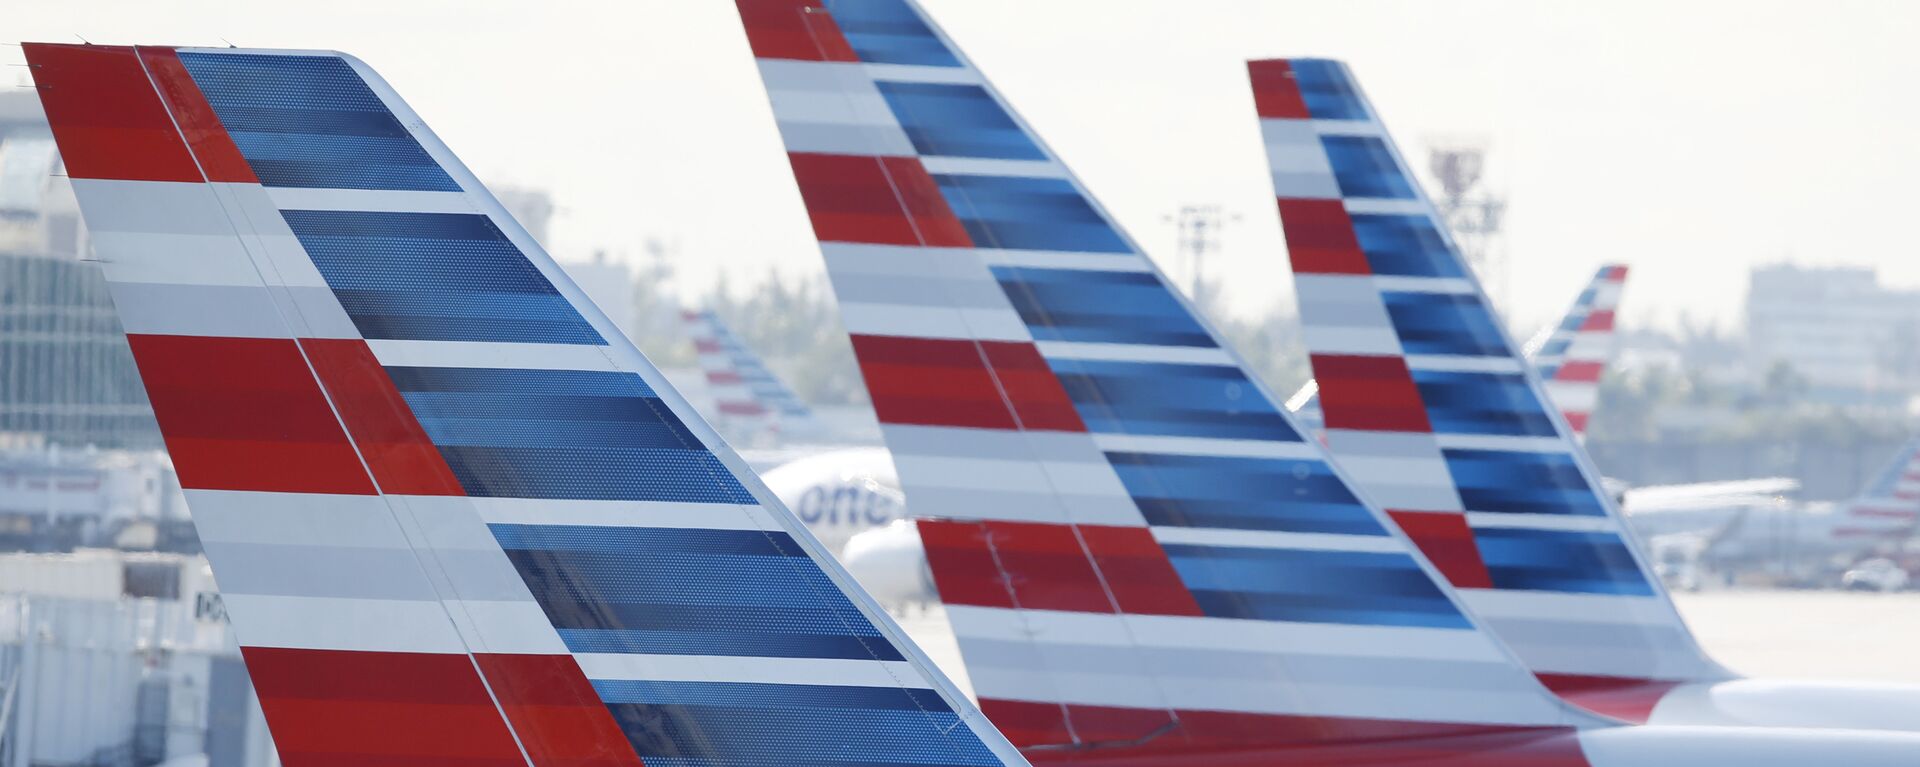 Painted vertical stabilizers are viewed as American Airlines jets are parked on the airport apron, Monday, Nov. 6, 2017, at Miami International Airport in Miami. American Airlines and a subsidiary will pay $9.8 million in stock to settle claims that they failed to help disabled employees return to work. - Sputnik International, 1920, 12.01.2022